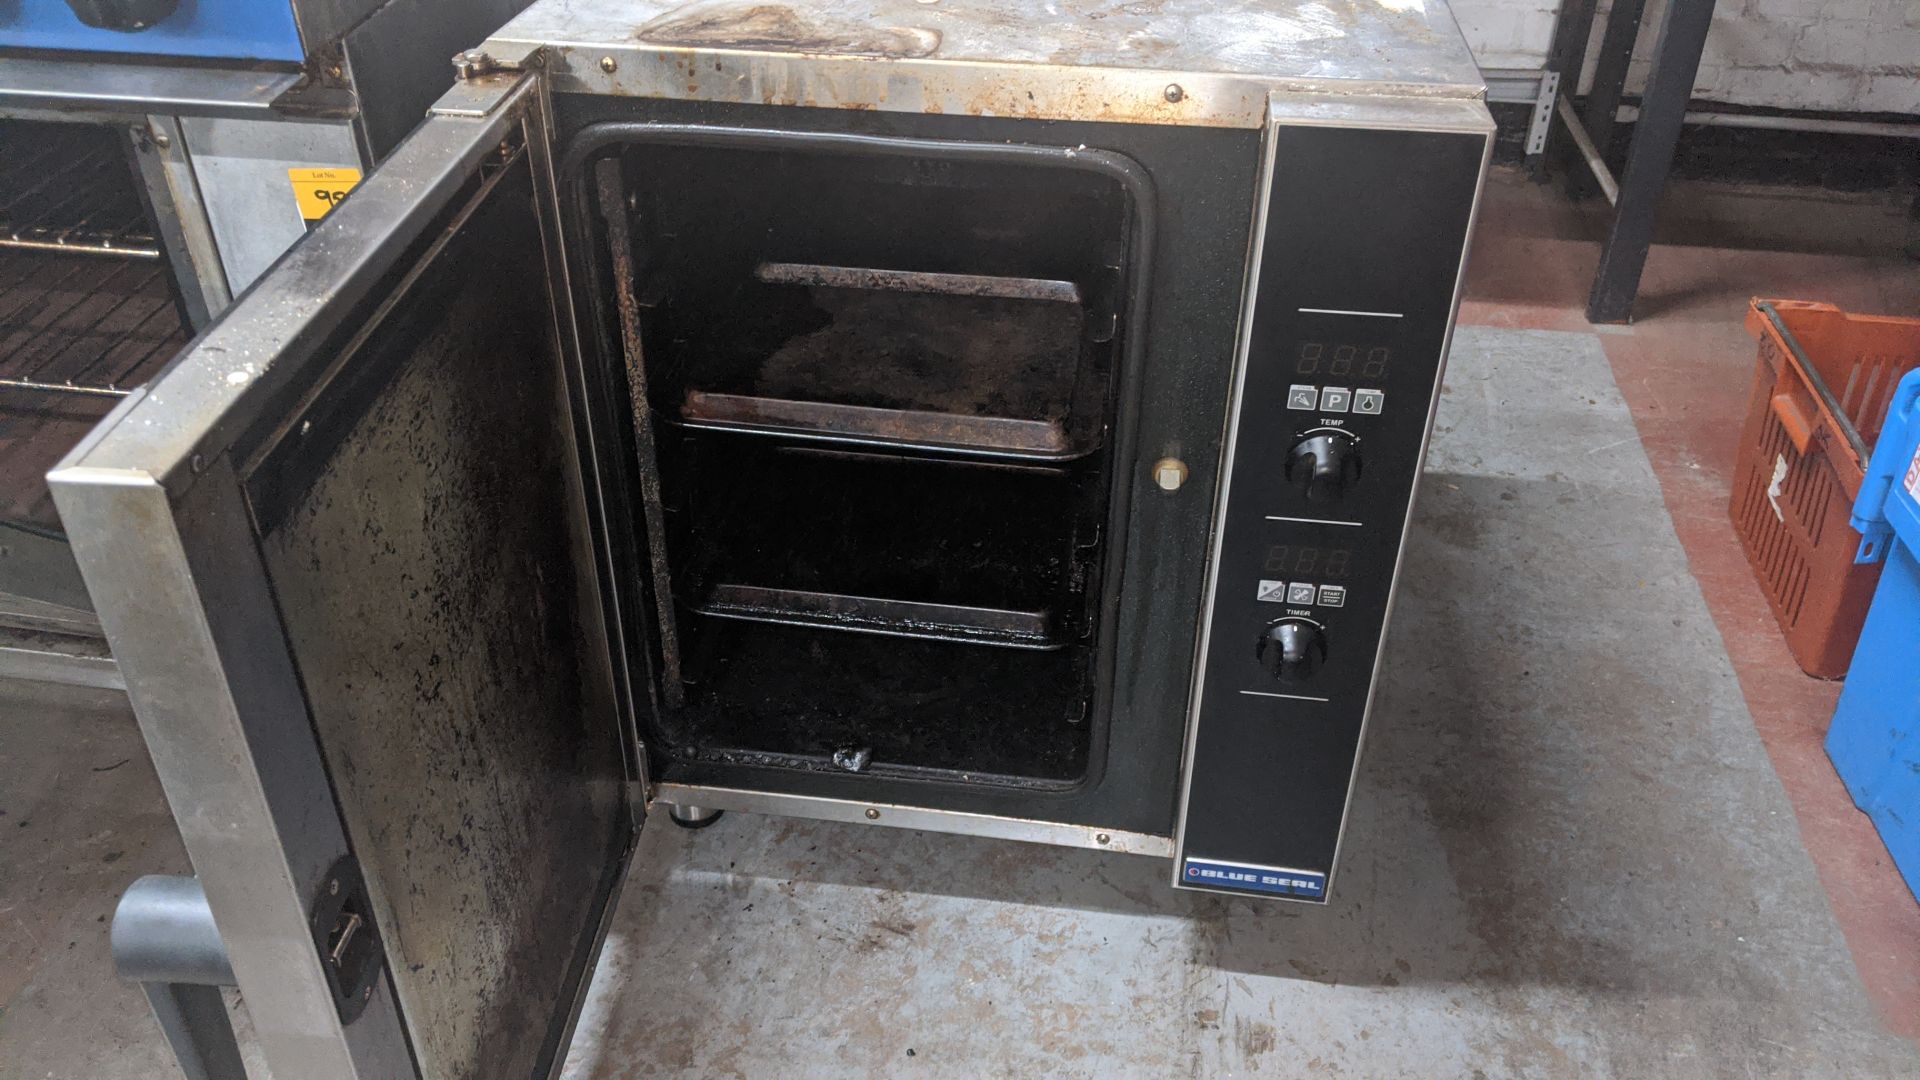 Blue Seal turbo fan oven, purchased new for £1,930 plus VAT . This is one of three items purchased - Image 9 of 15